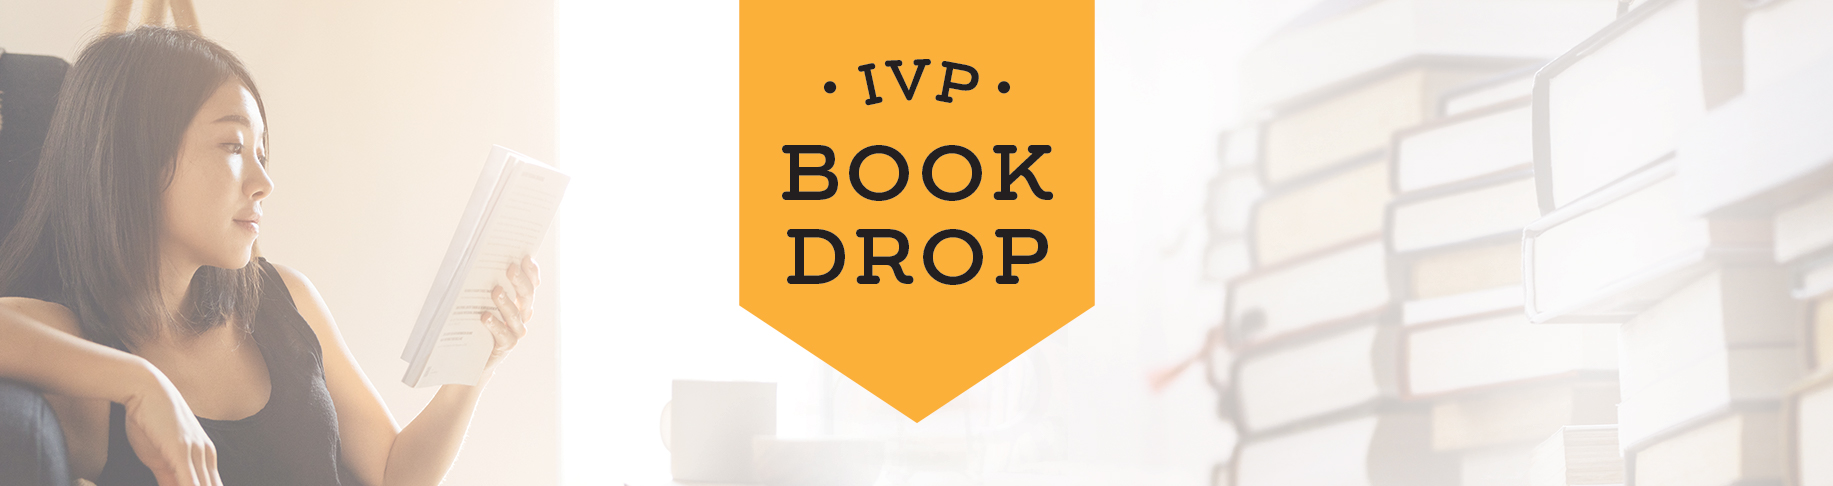 Join IVP Book Drop and get a new book every month for $9.99!